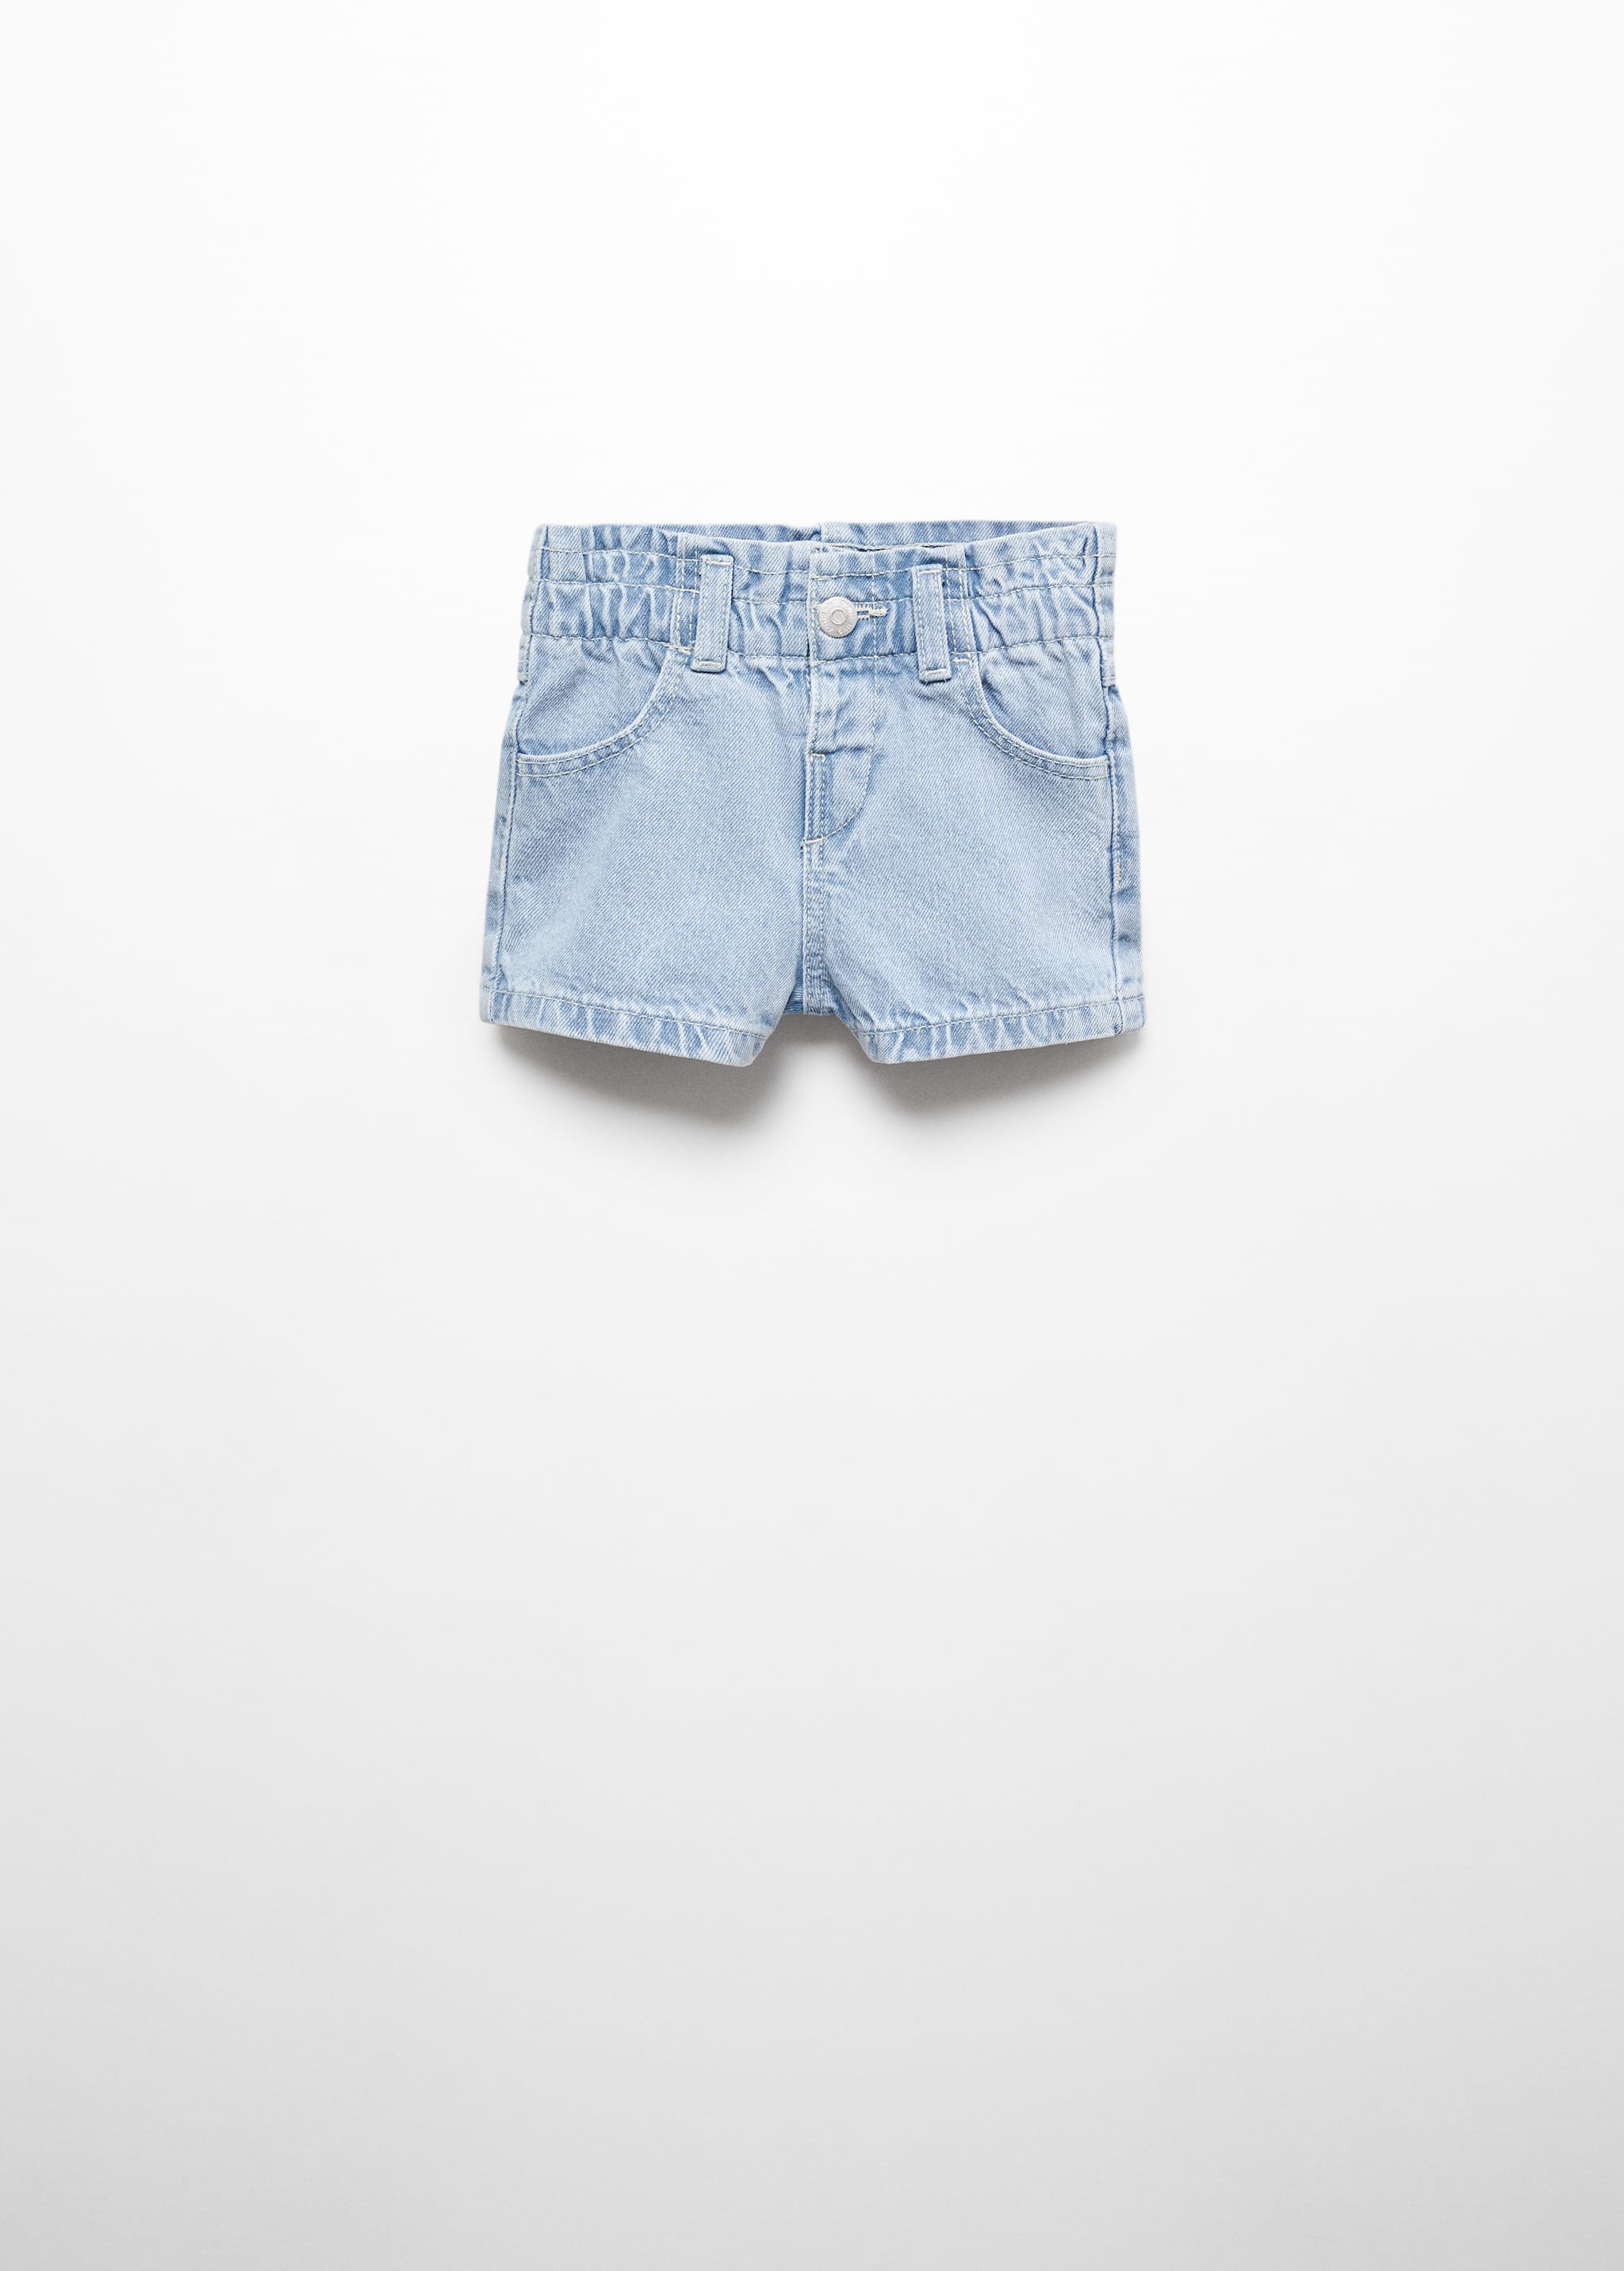 Paperbag denim shorts - Article without model